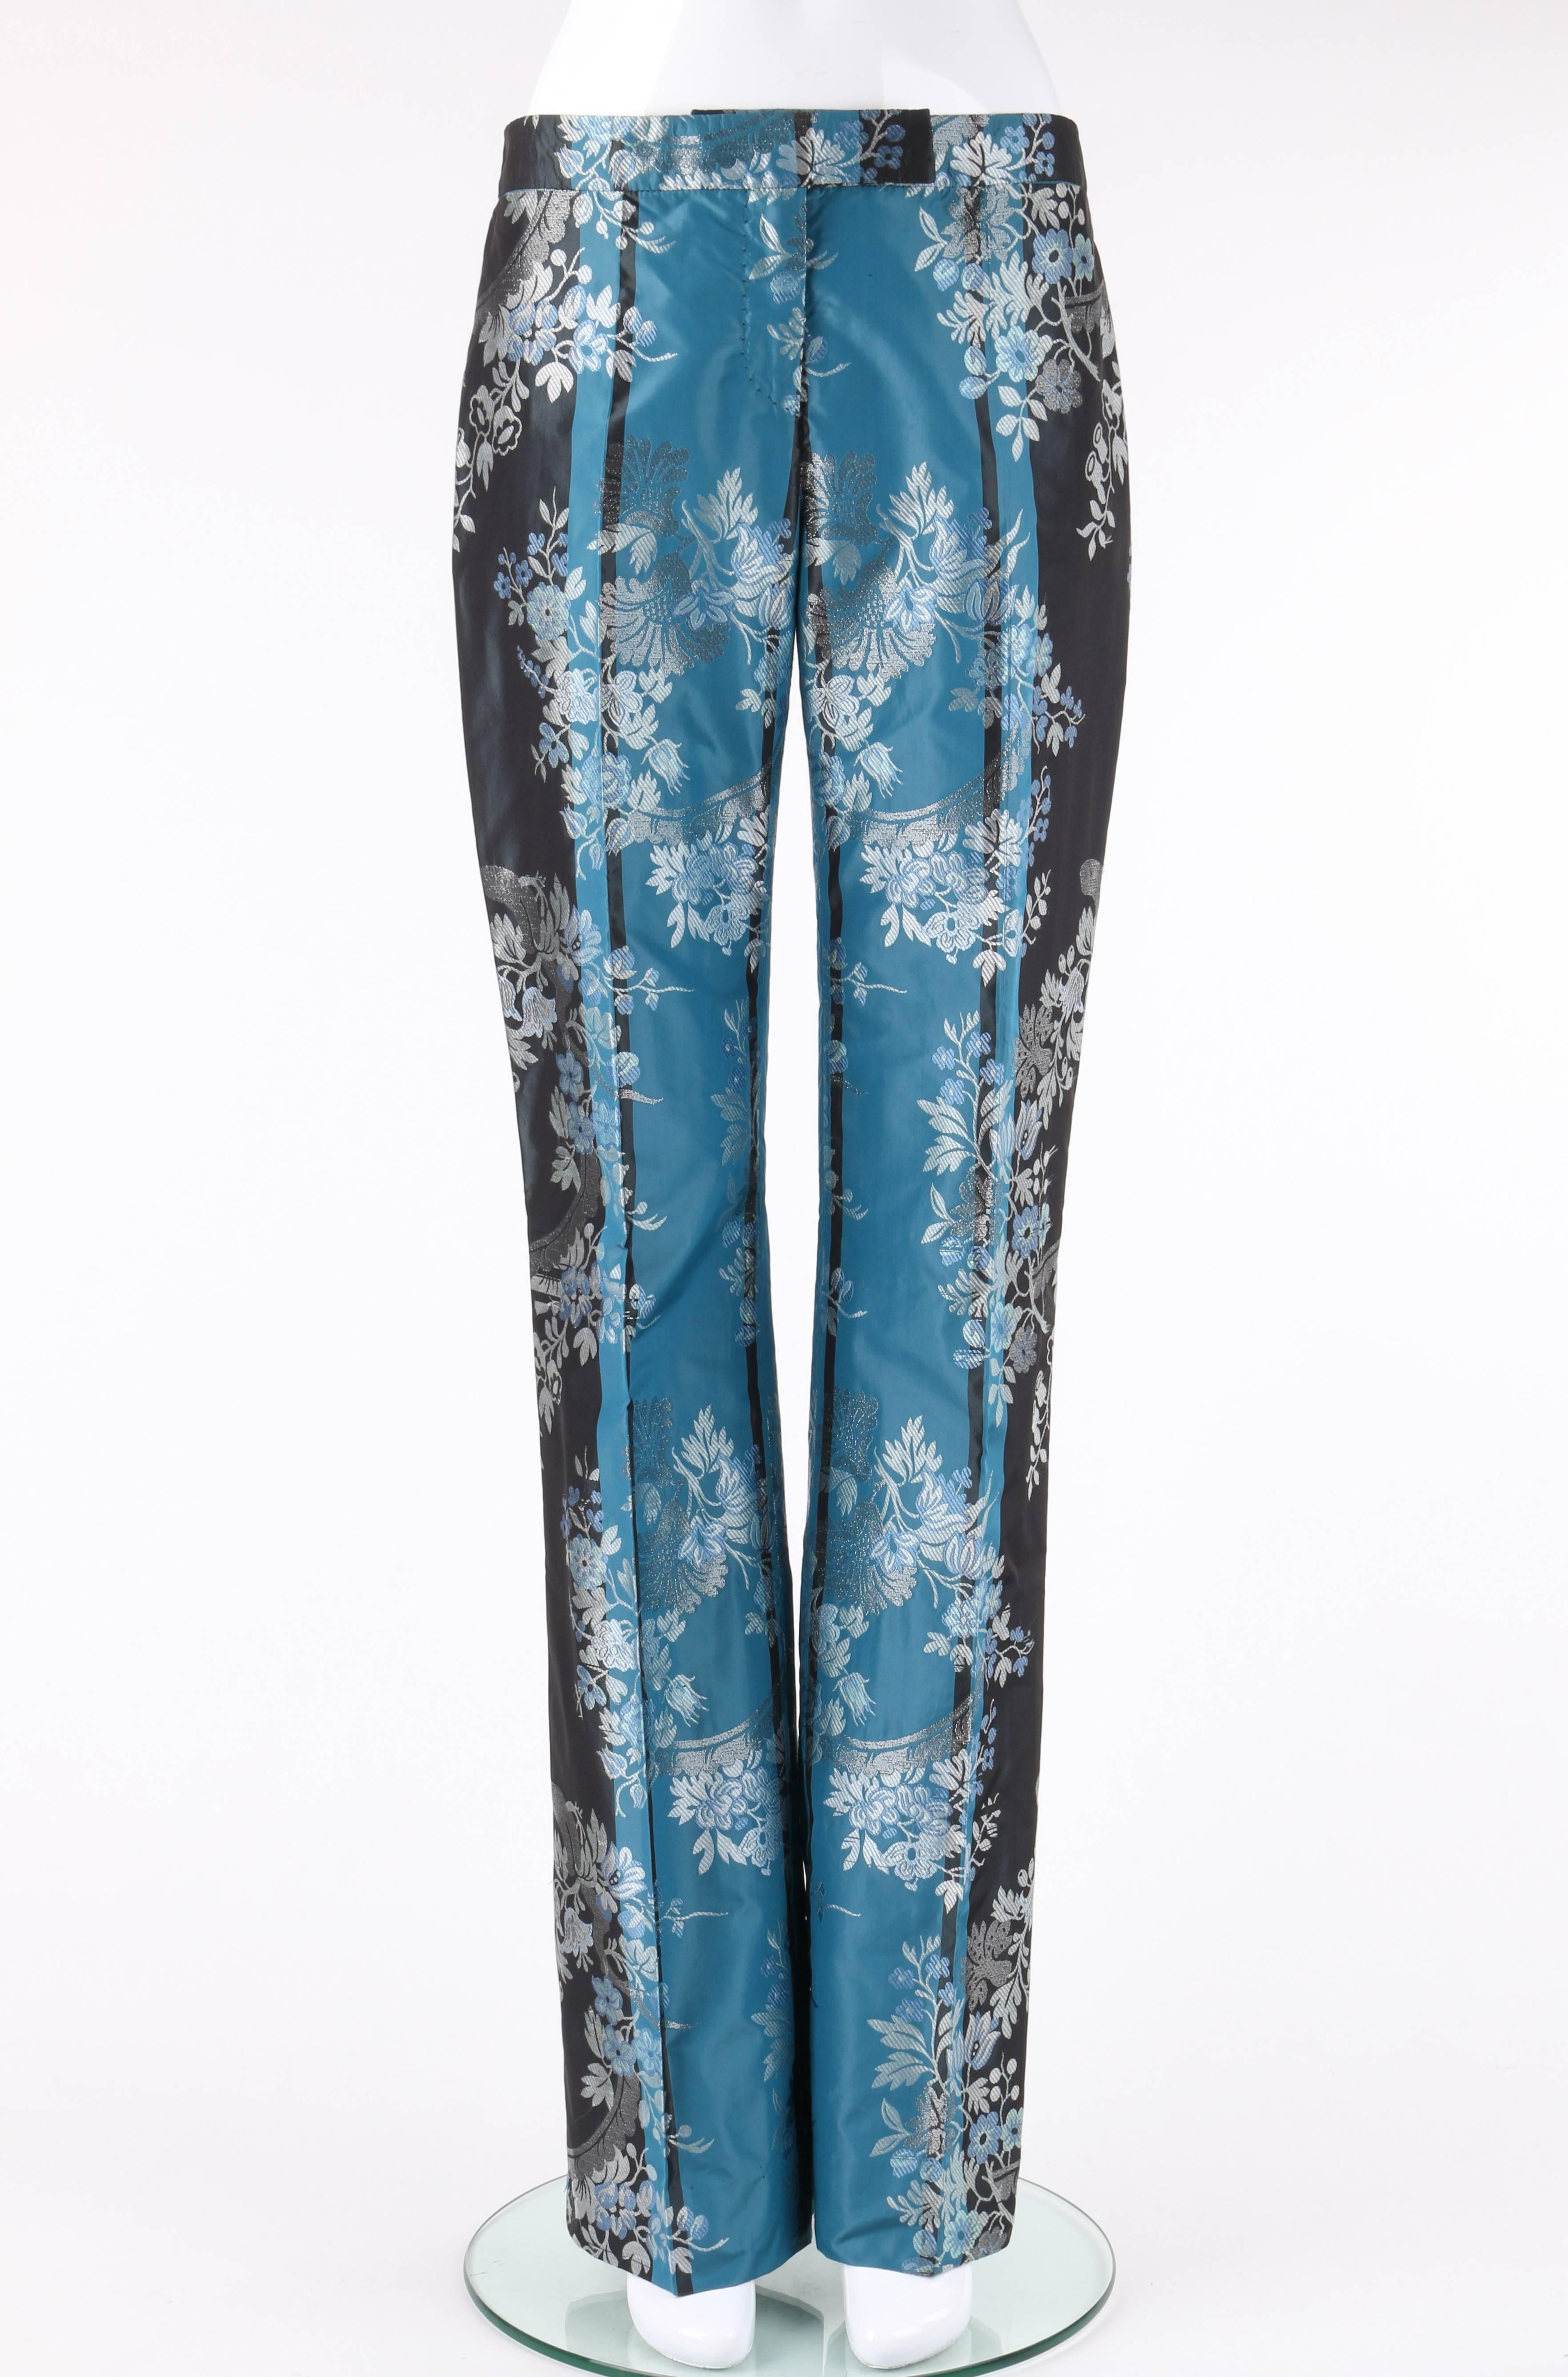 Alexander McQueen Autumn/Winter 2002 two tone floral brocade pants. From Alexander McQueen's Supercalifragilistic collection. Two tone teal and charcoal gray silk floral silk brocade. Thin banded waist. Center front zip fly with single exterior hook